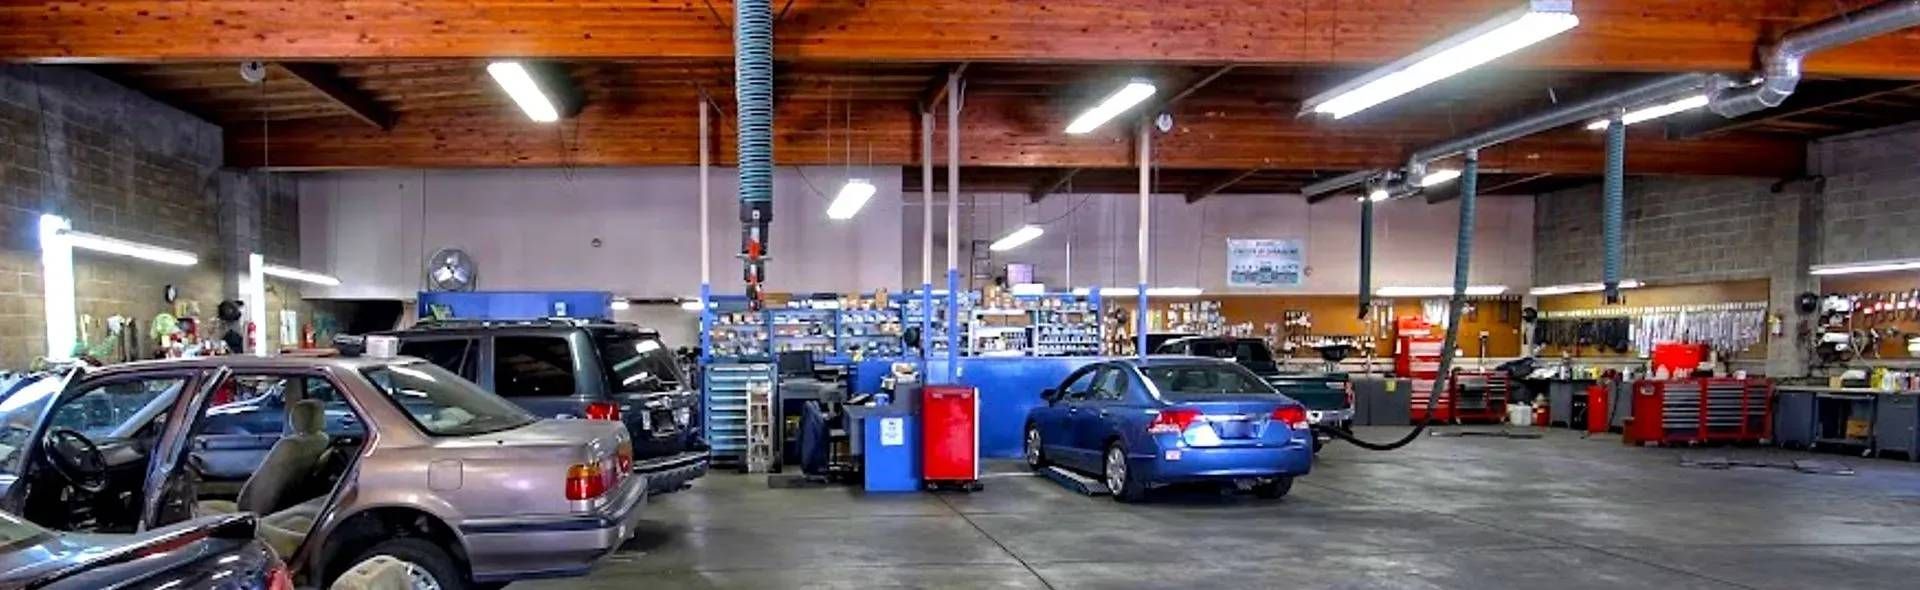 Vehicles at the garage in our auto repair shop | Berkeley Minicar